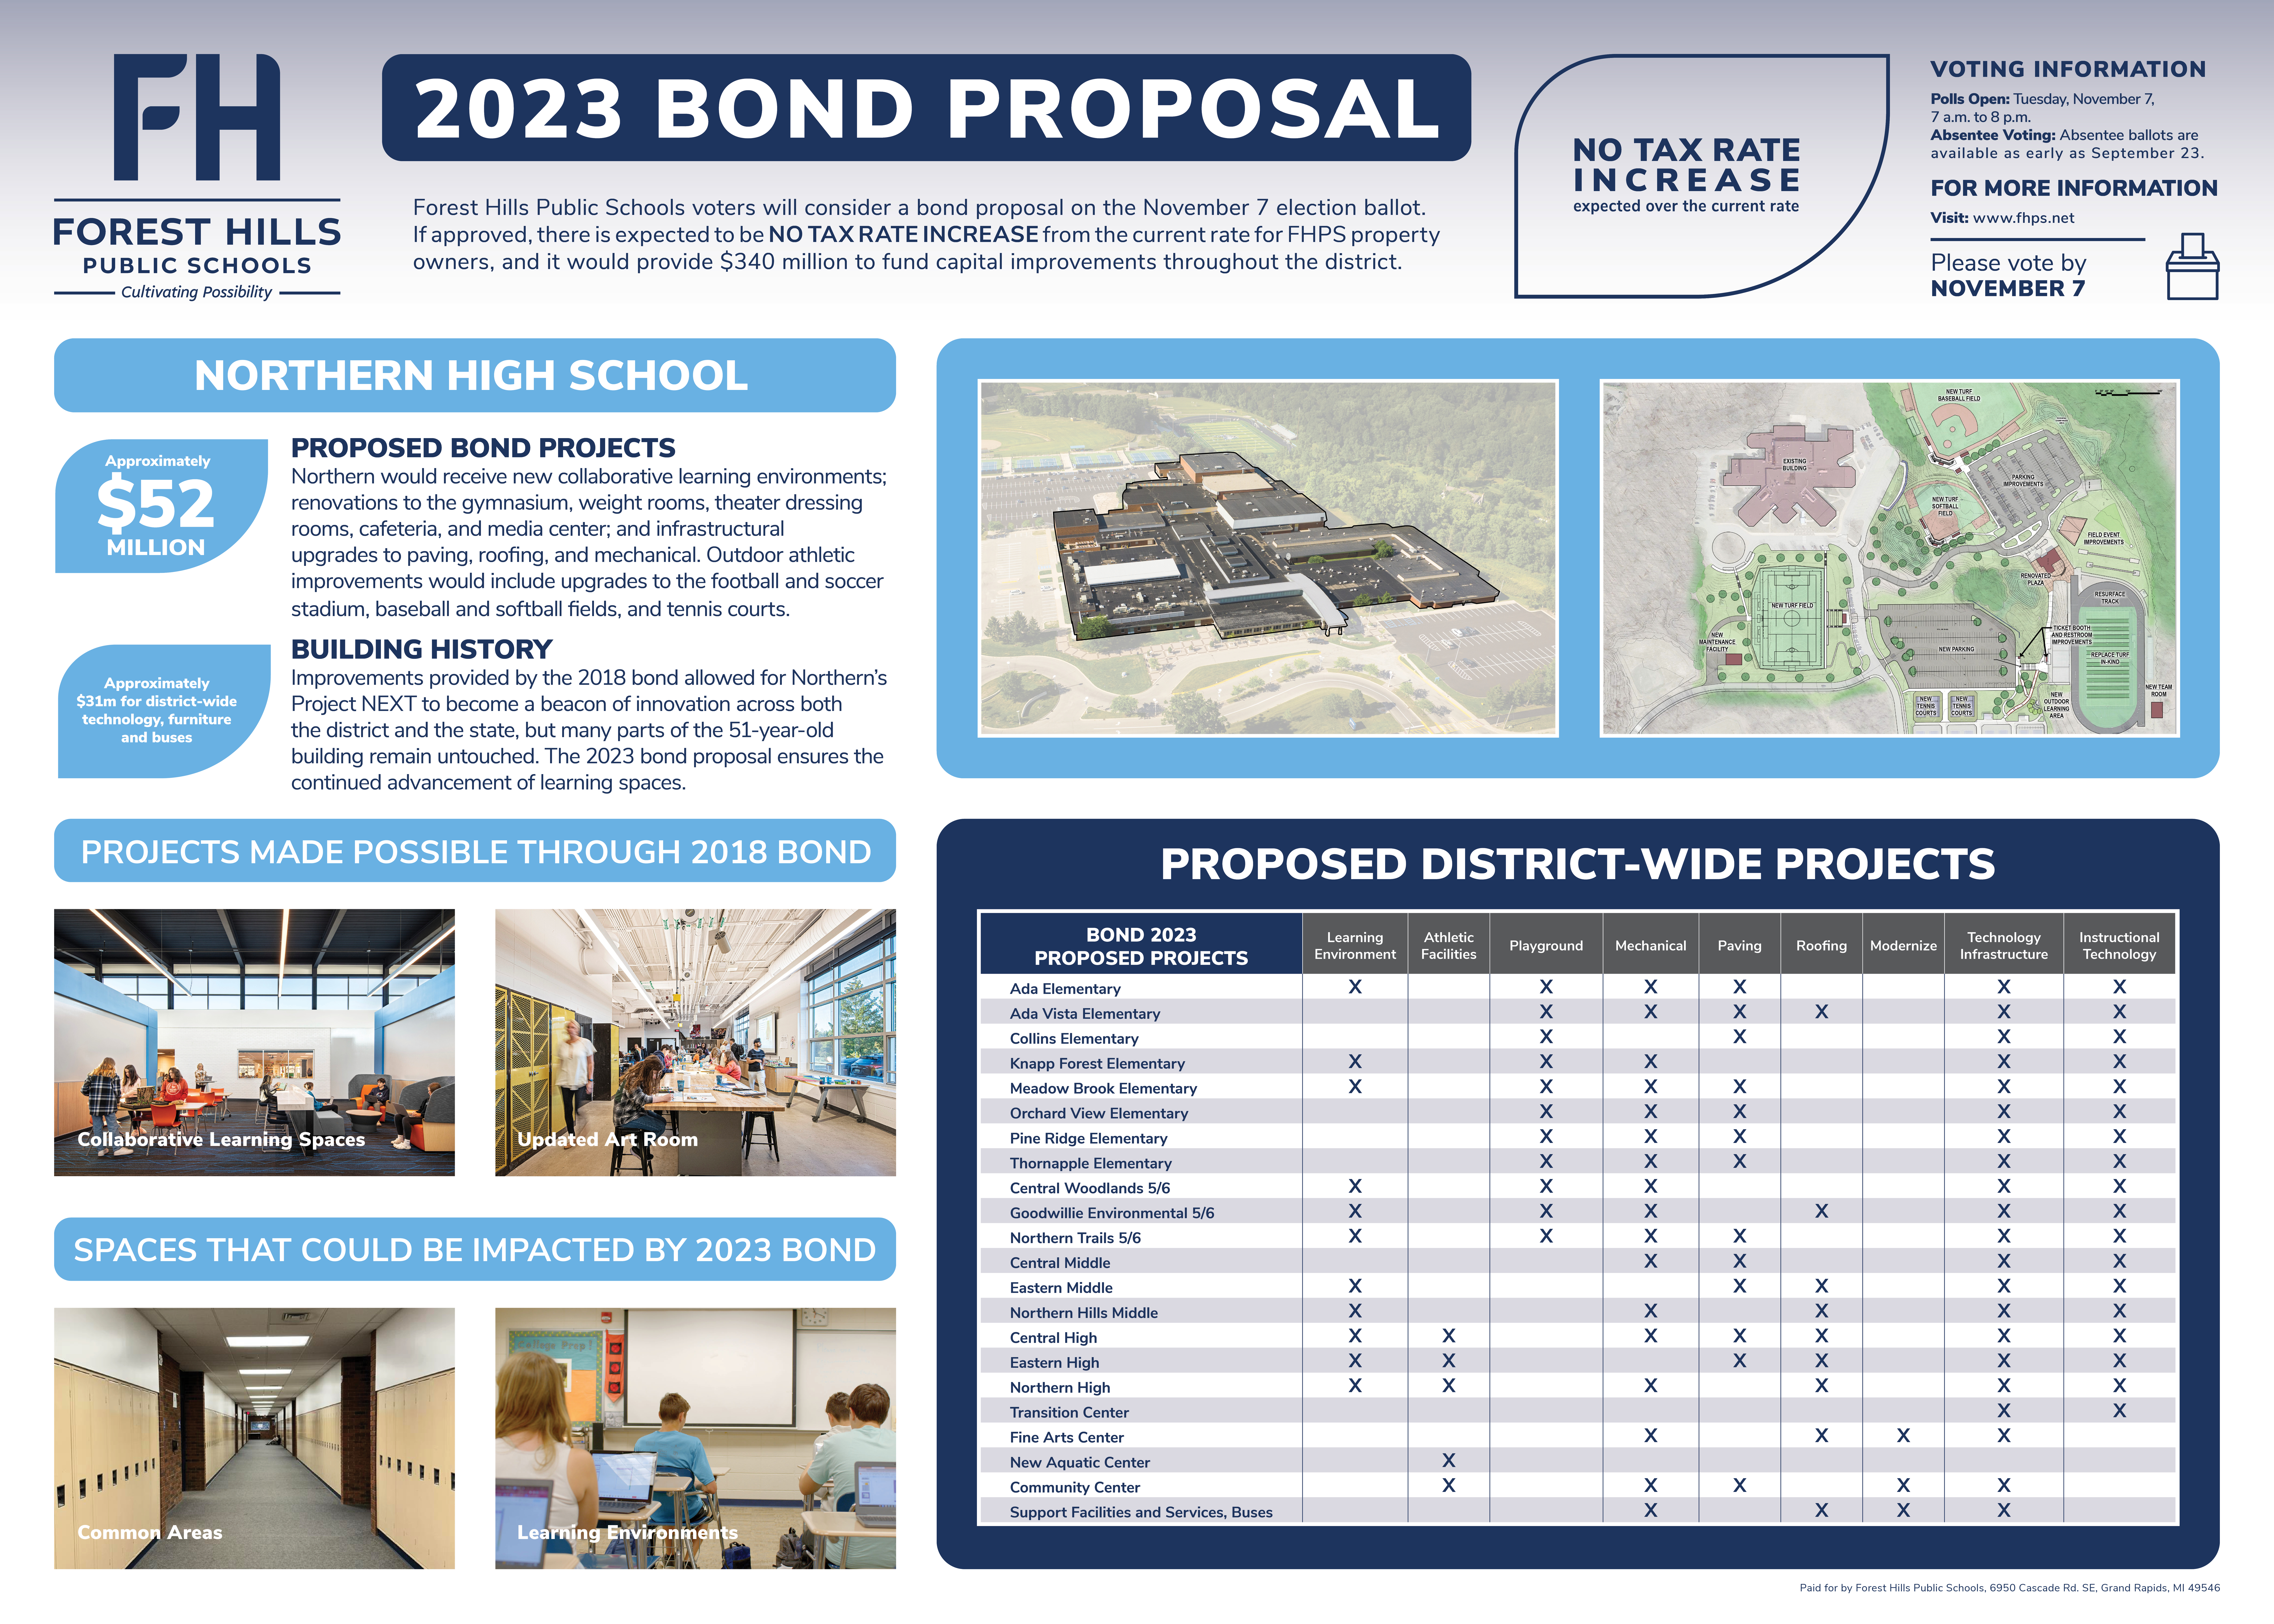 Northern High and pictures of the existing building and bond project pictures from 2018 and spaces that could be impacted by the 2023 bond.